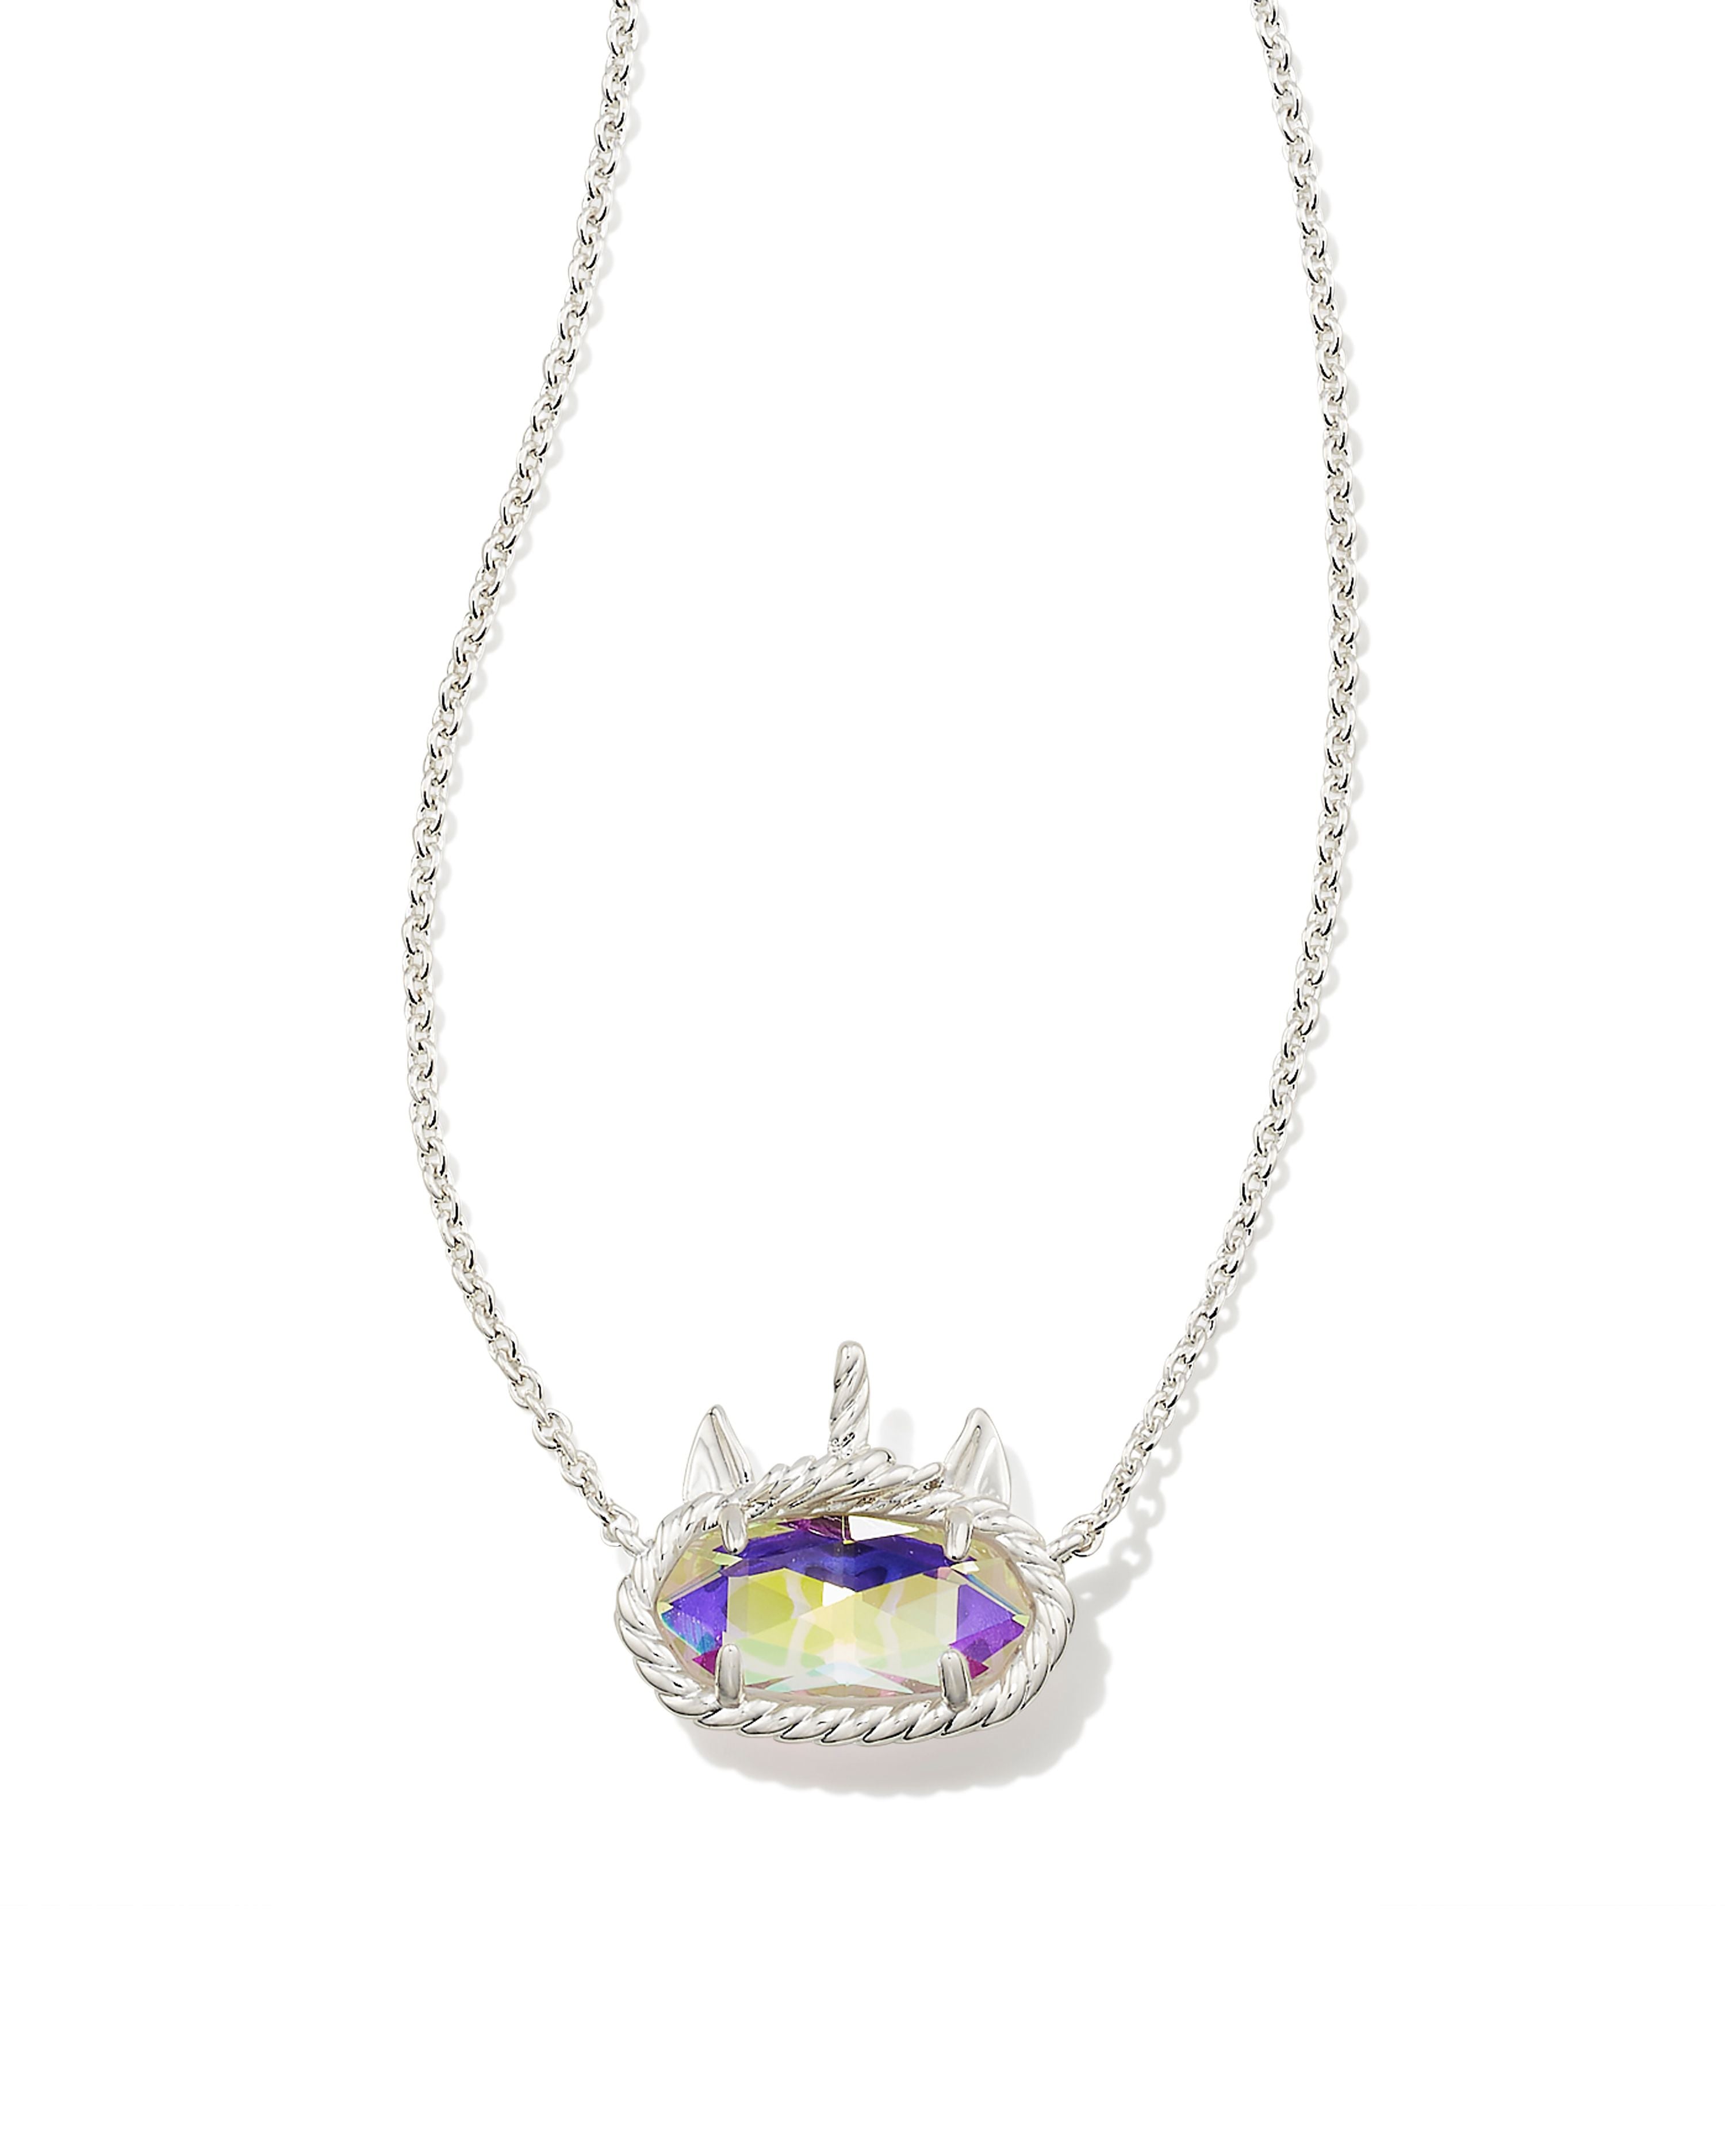 Kendra Scott Elisa Unicorn Oval Pendant Necklace in Dichroic Glass and Bright Silver